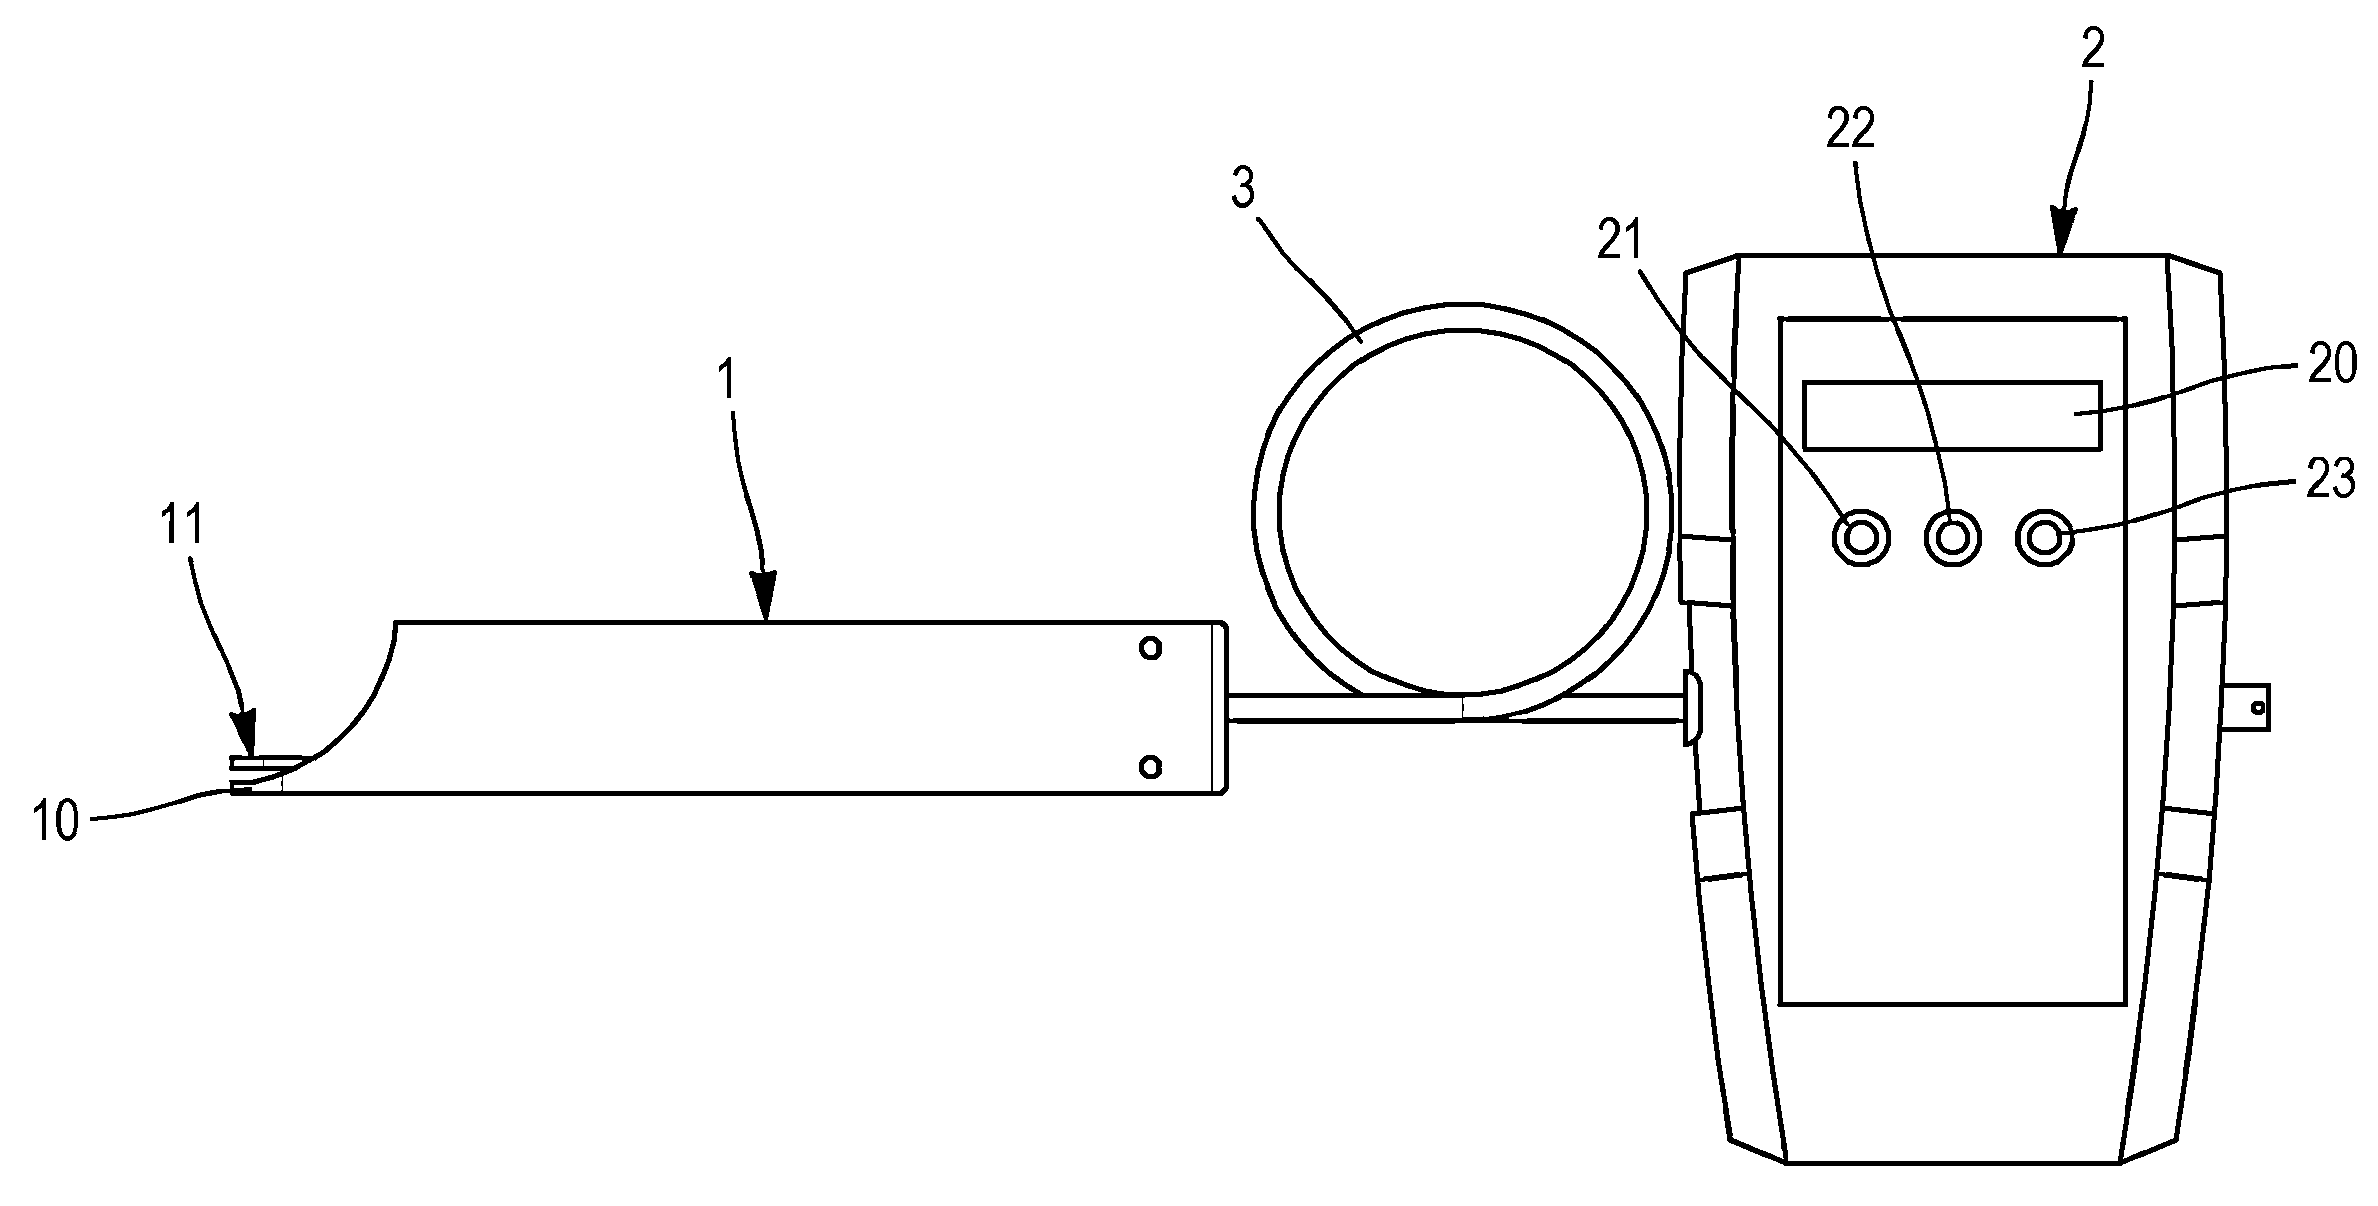 Device for measuring the pinch force between a person's thumb and index finger